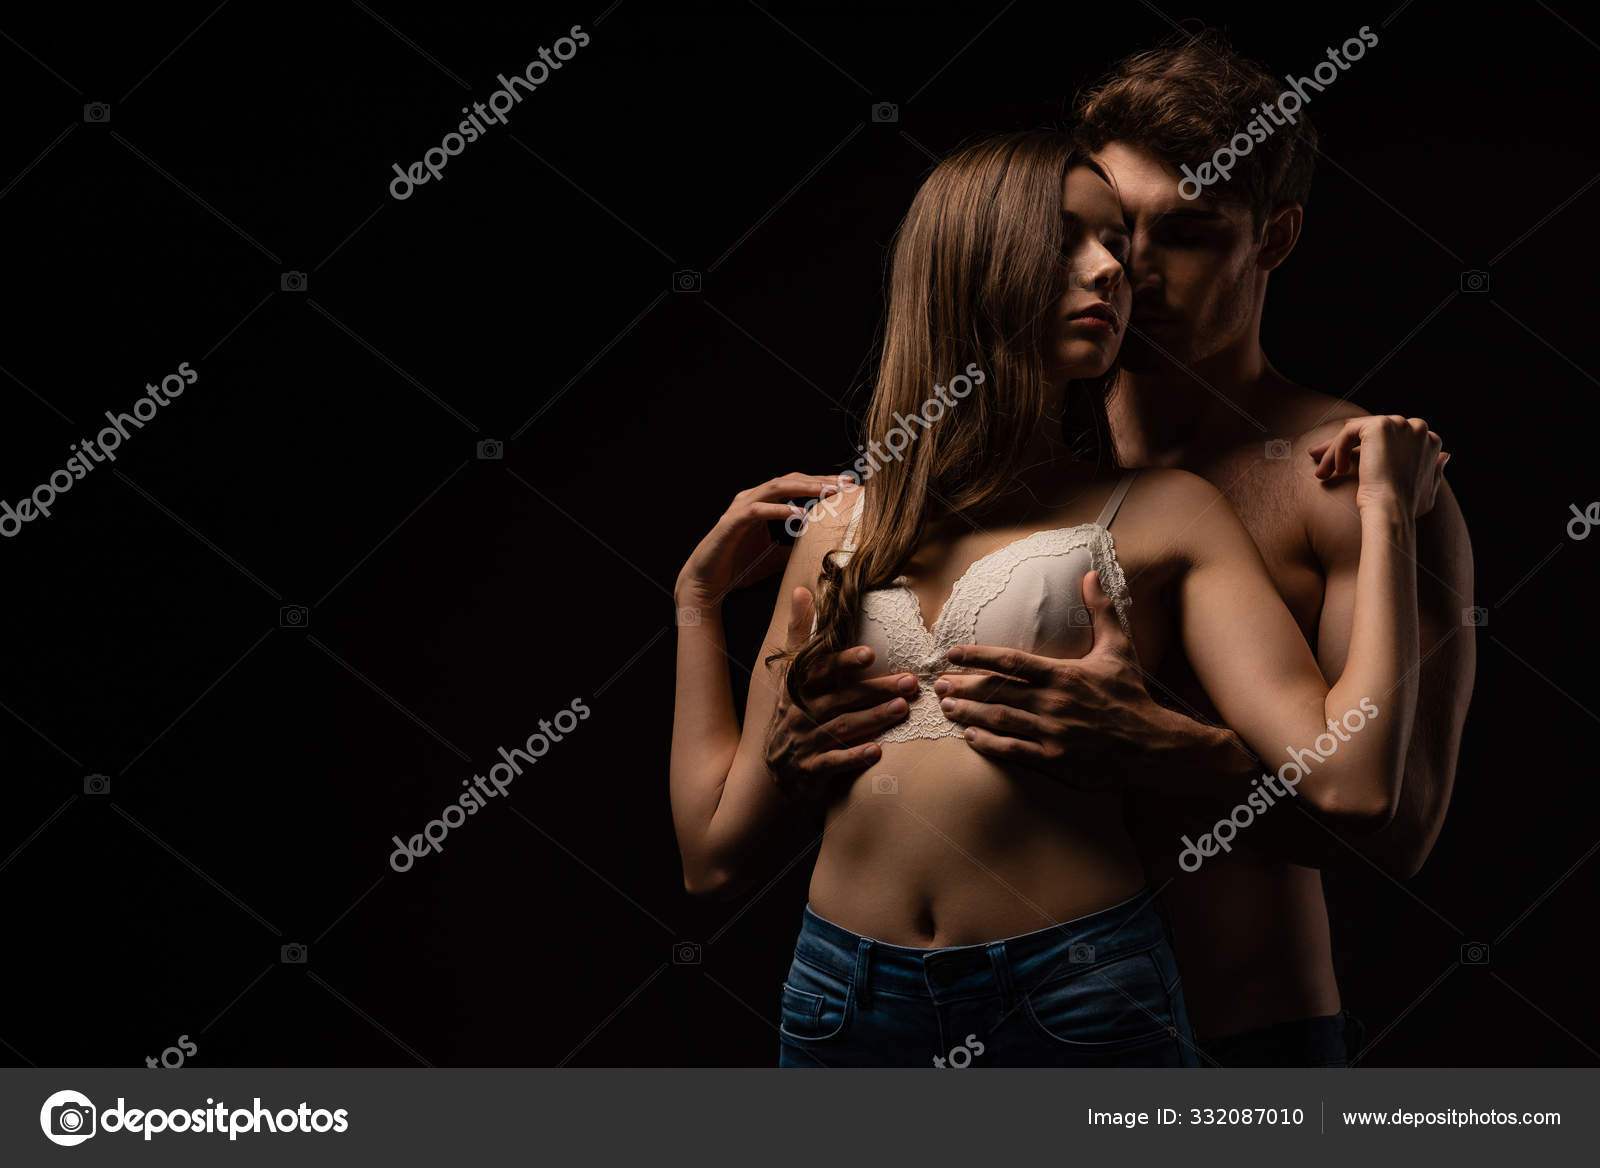 touching girlfriends boobs while kissing